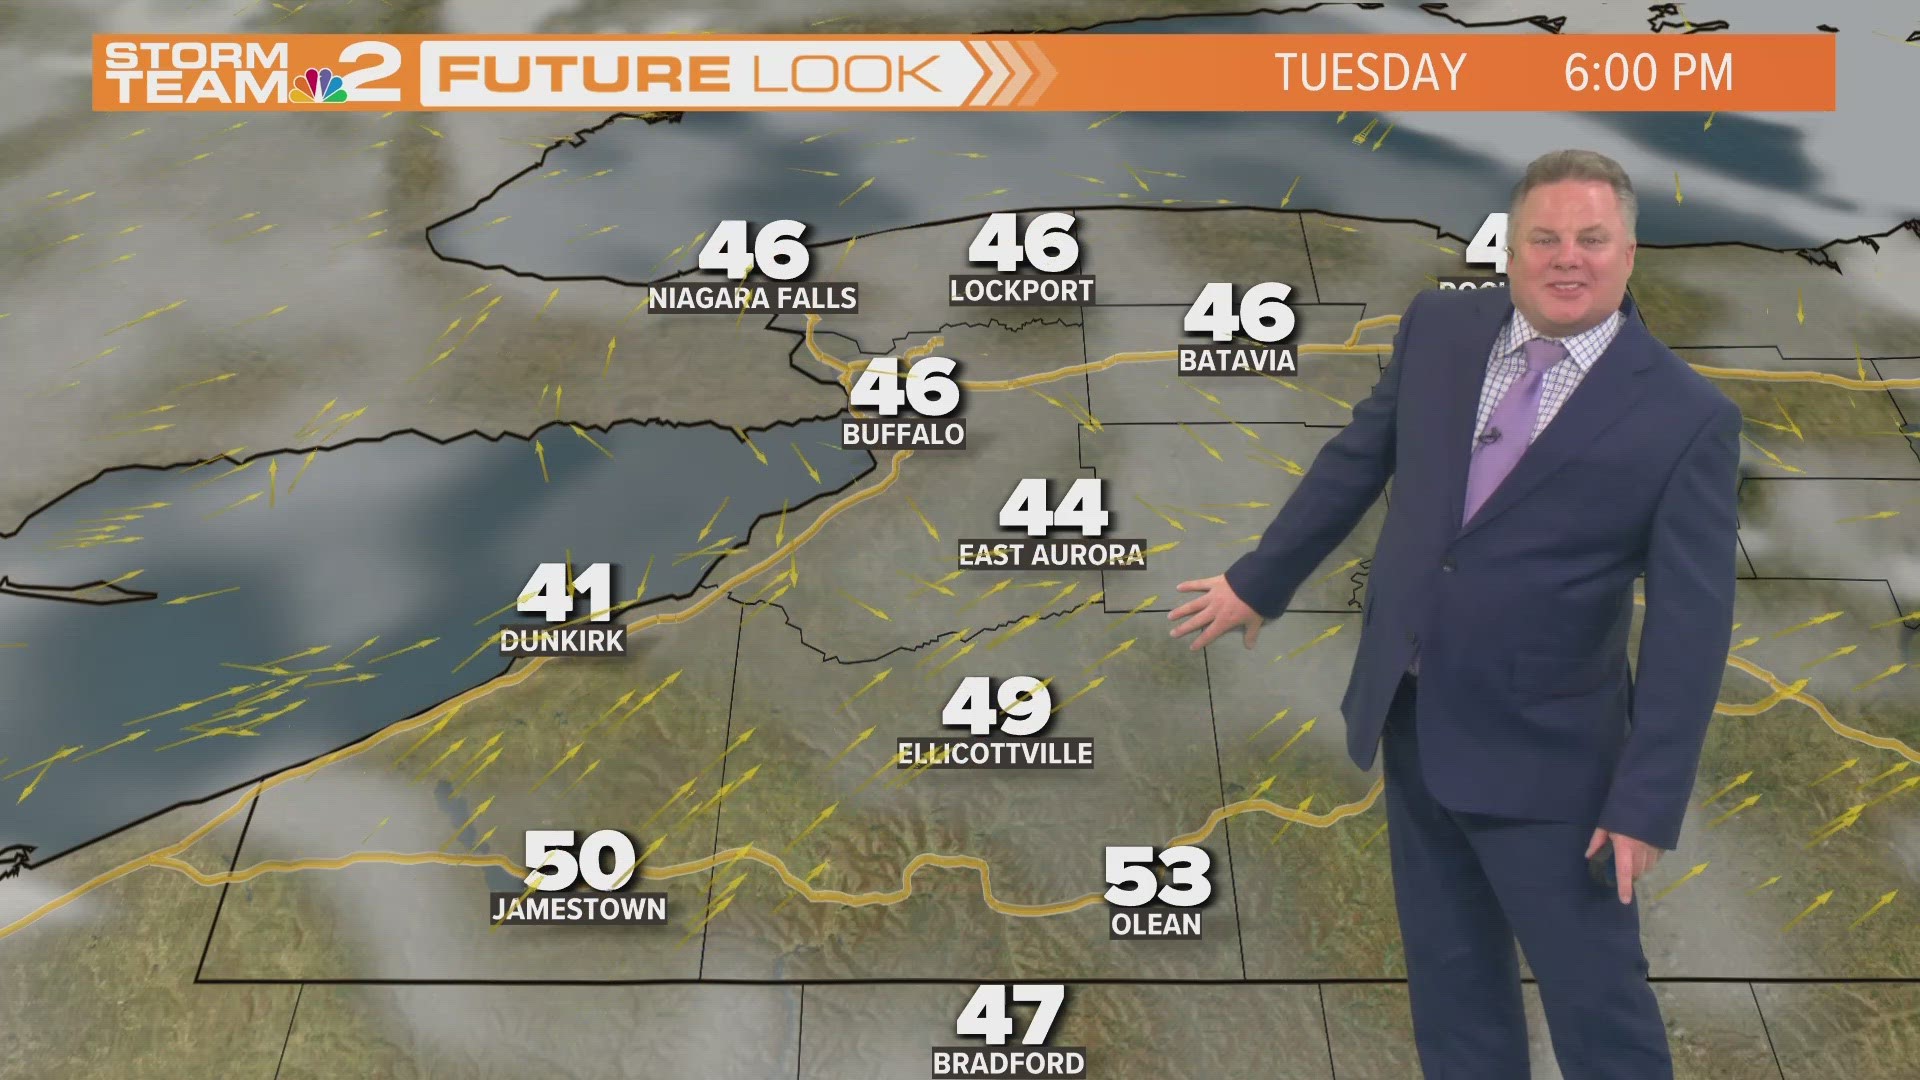 Meteorologist Patrick Hammer has your Storm Team 2 Forecast for 03/21/2023